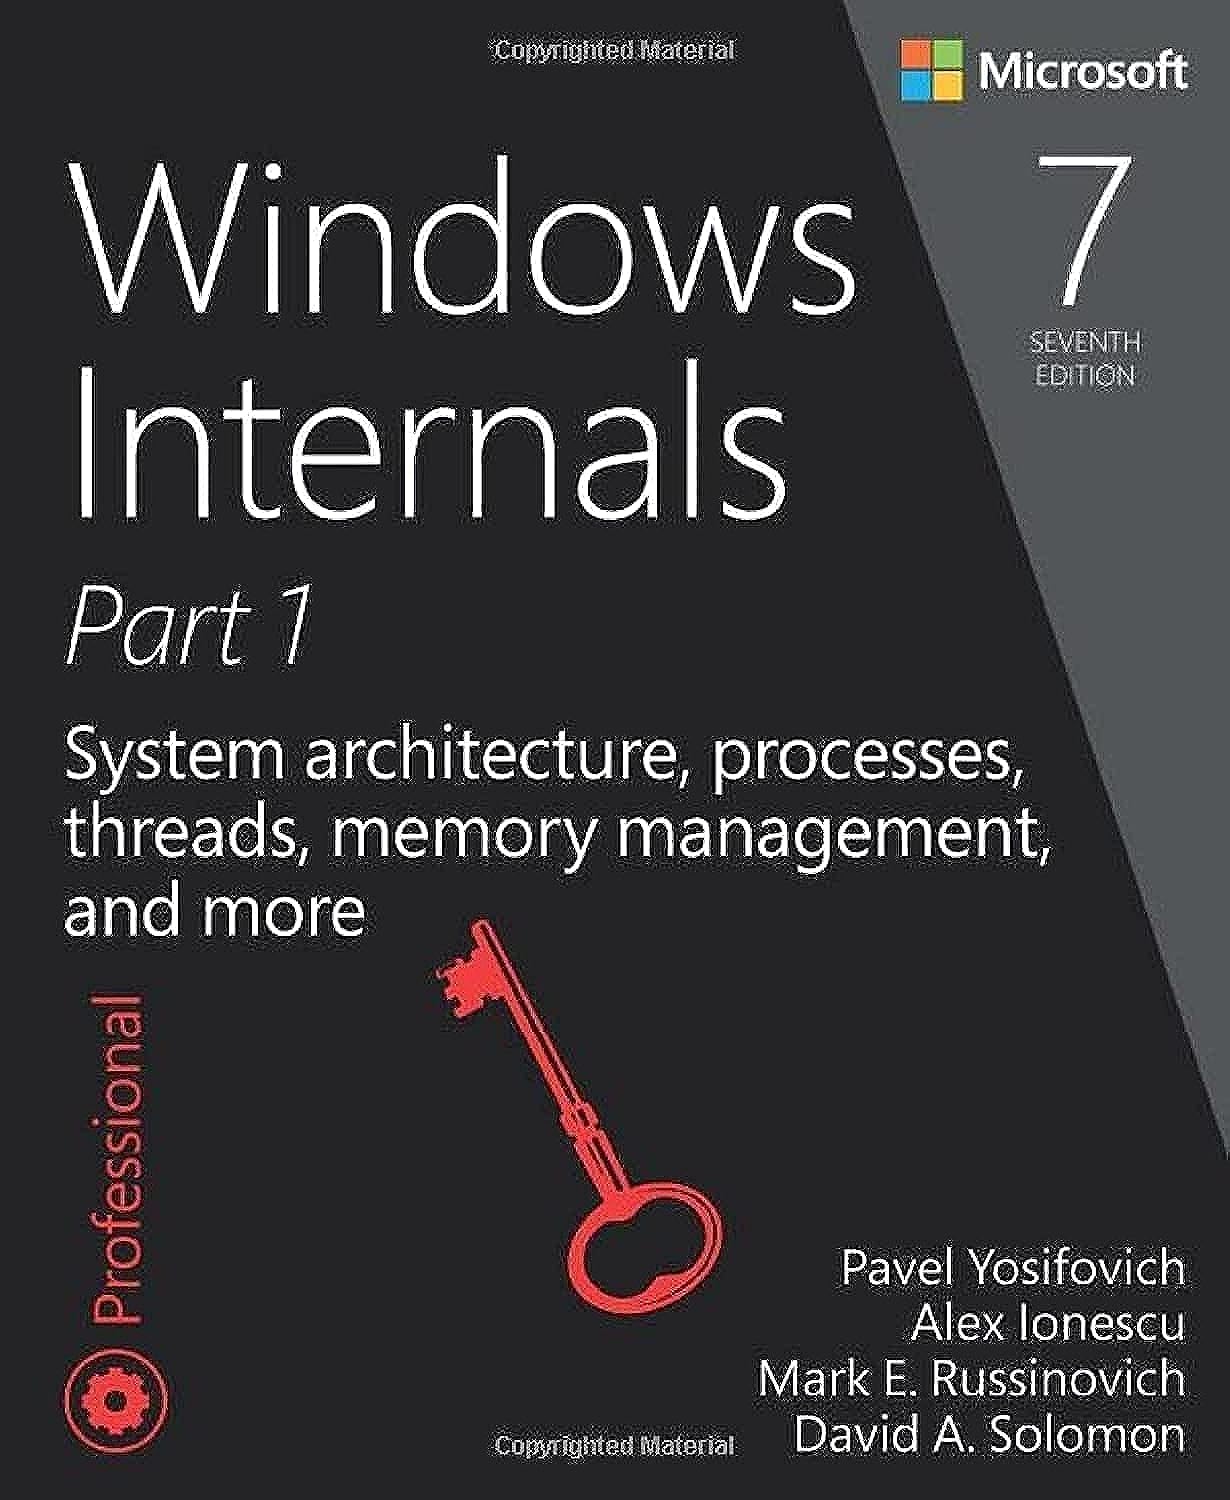 Windows Internals: System architecture, processes, threads, memory management, and more, Part 1 (Developer Reference)